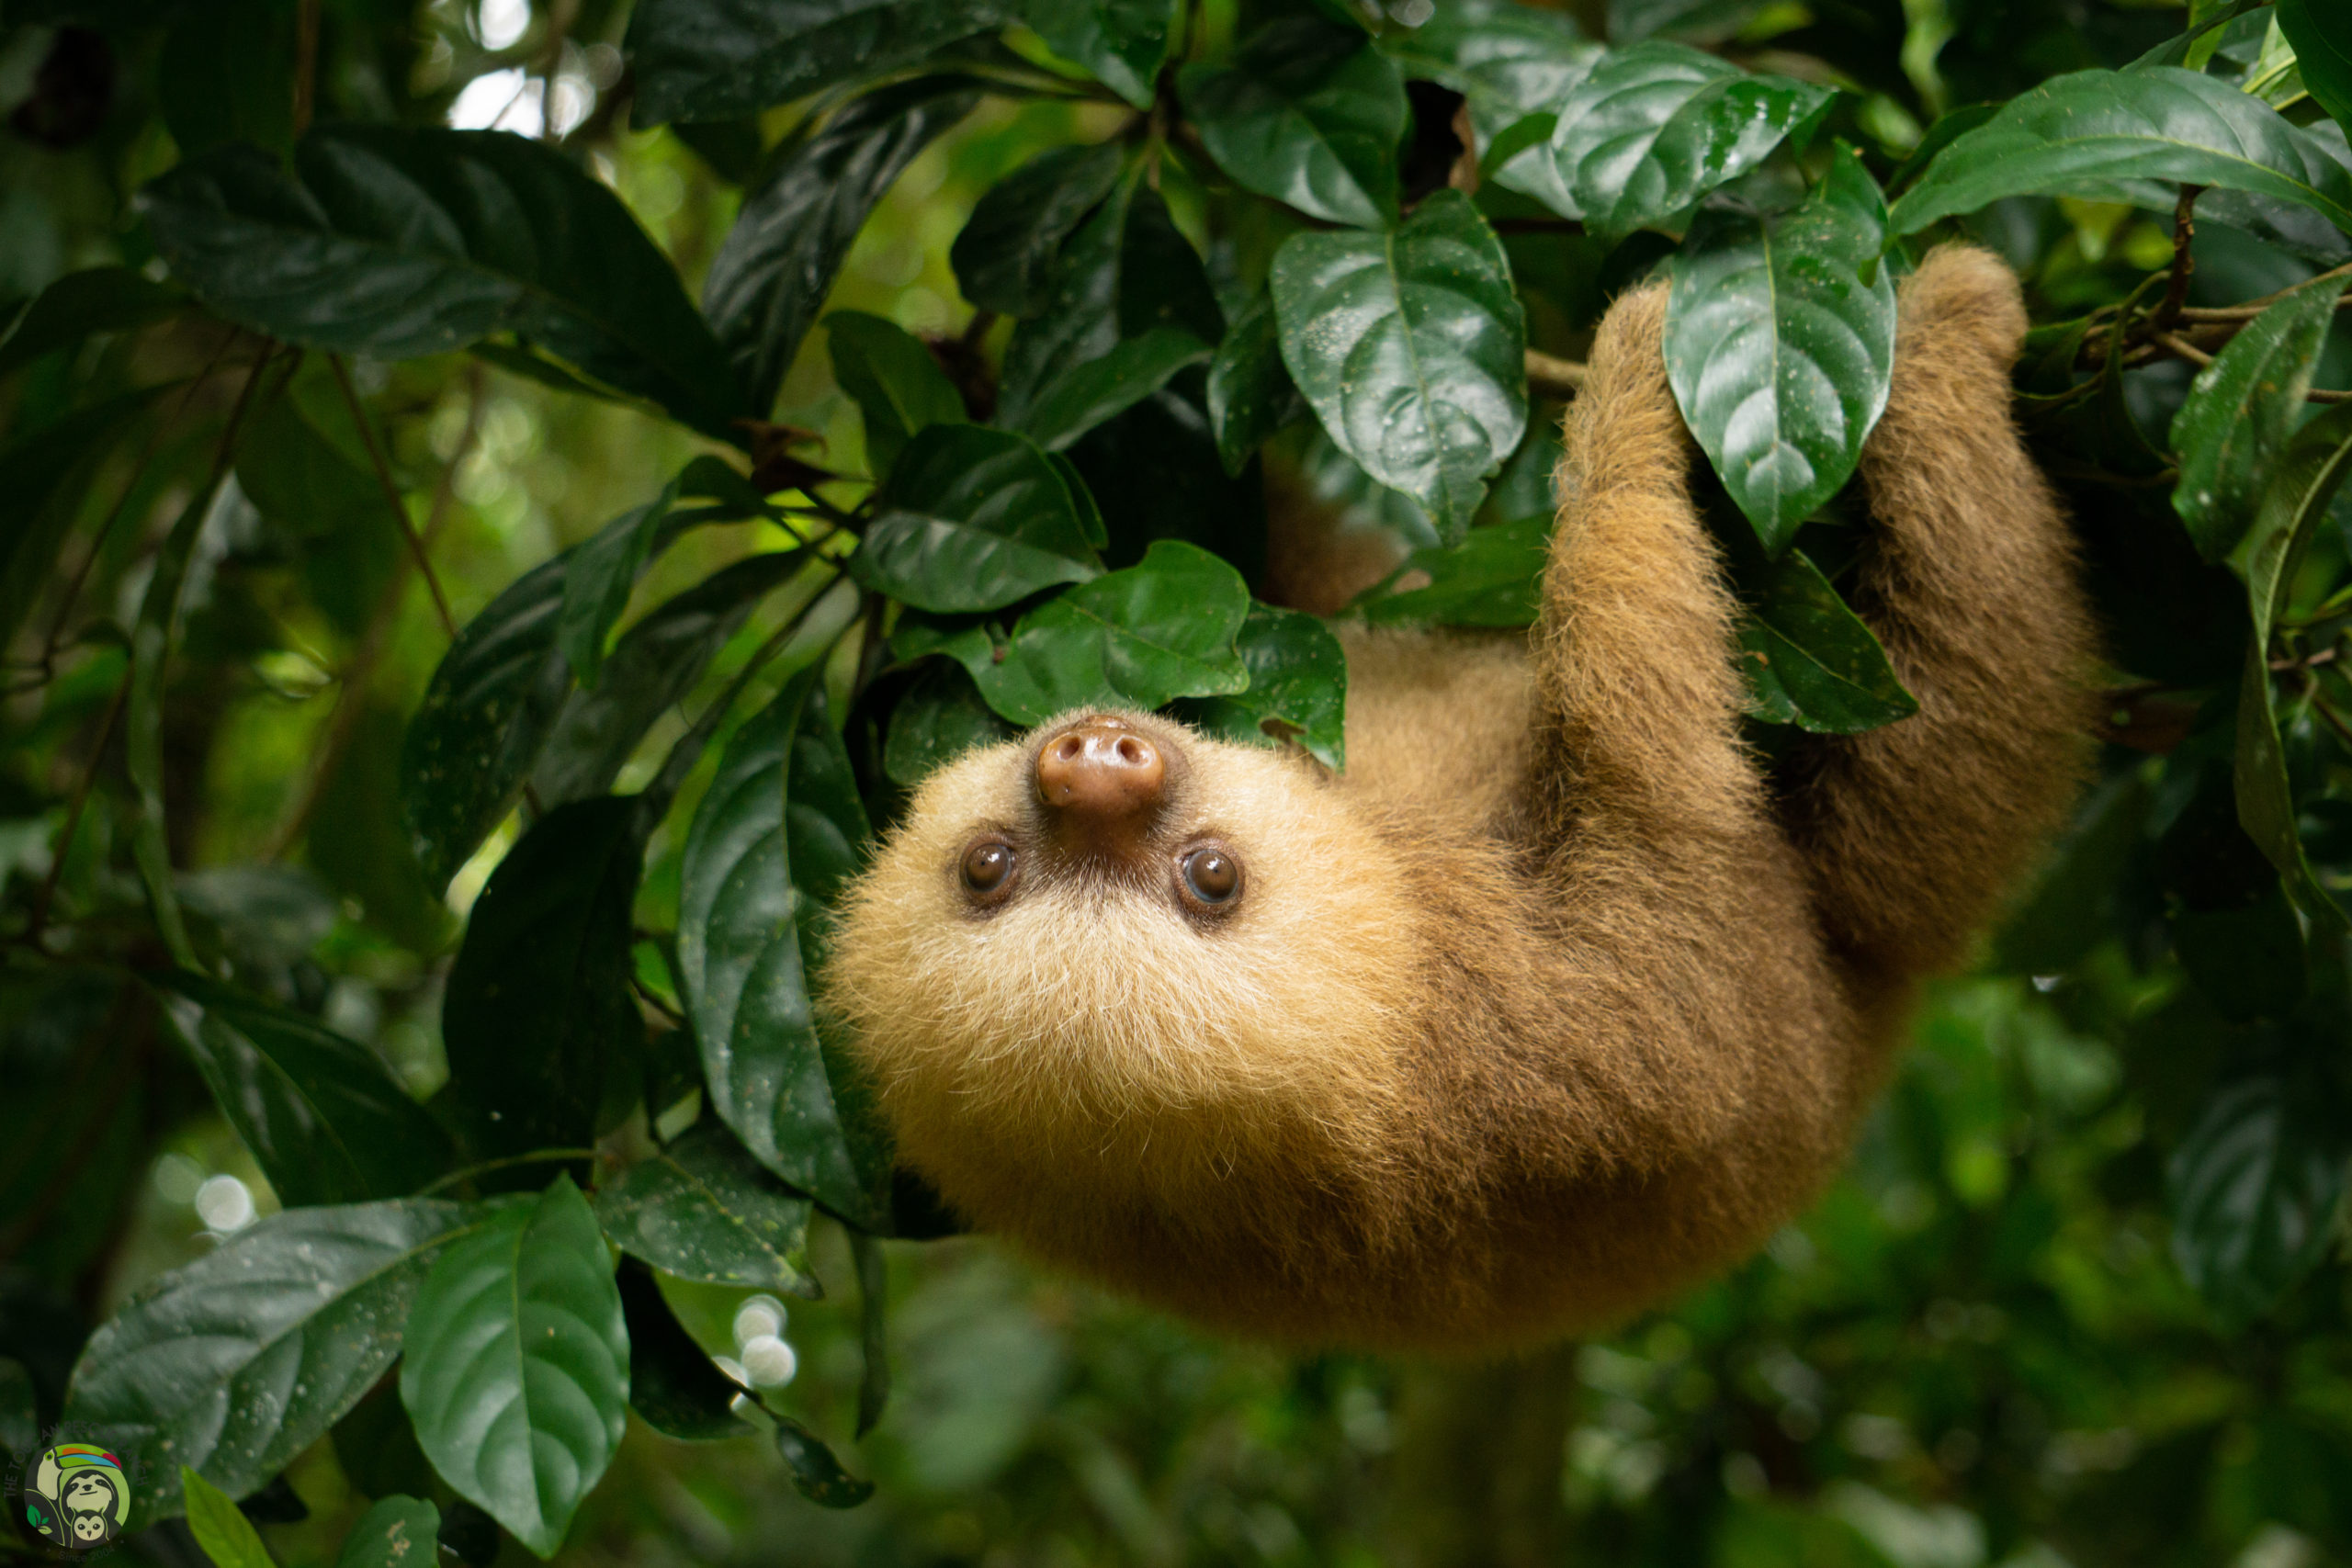 The Sloth becomes a National Symbol of Costa Rica – Toucan Rescue Ranch